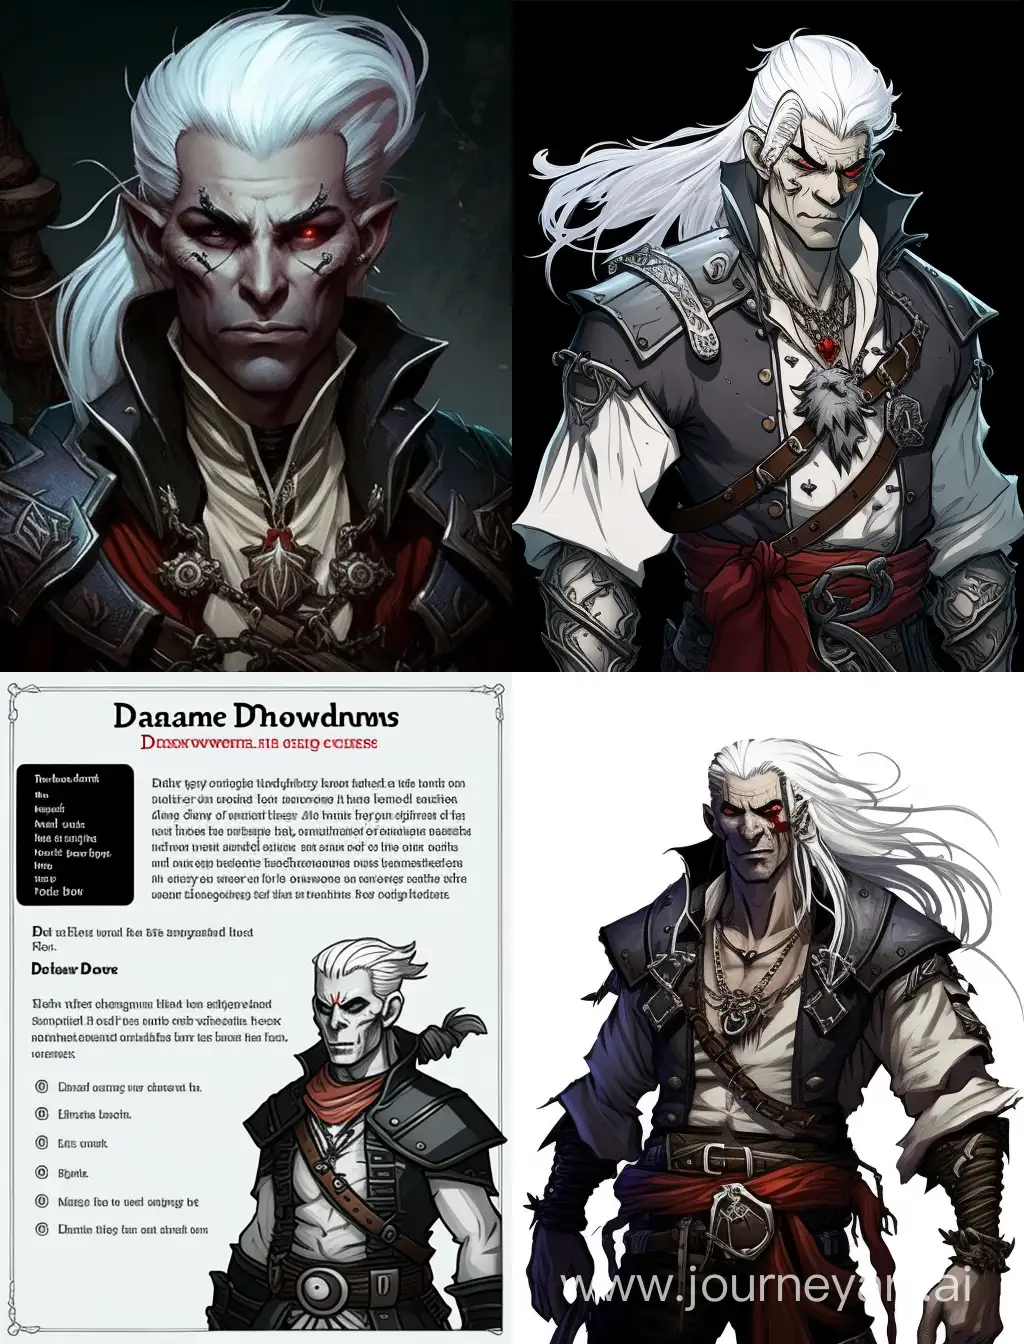 Draw a character from the Dungeons and Dragons universe according to the following description: He is a handsome young drow pirate, dressed in swashbuckler clothes. His swept back white hair is gathered in a long braid, his face with a calm smile is clean shaven and his eyes have red iris. His teeth are sharp. He has grey skin, but his hands have purple veins and black claws.
His demeanor is calm.
He is standing on the deck of a pirate ship, with sun setting in the background